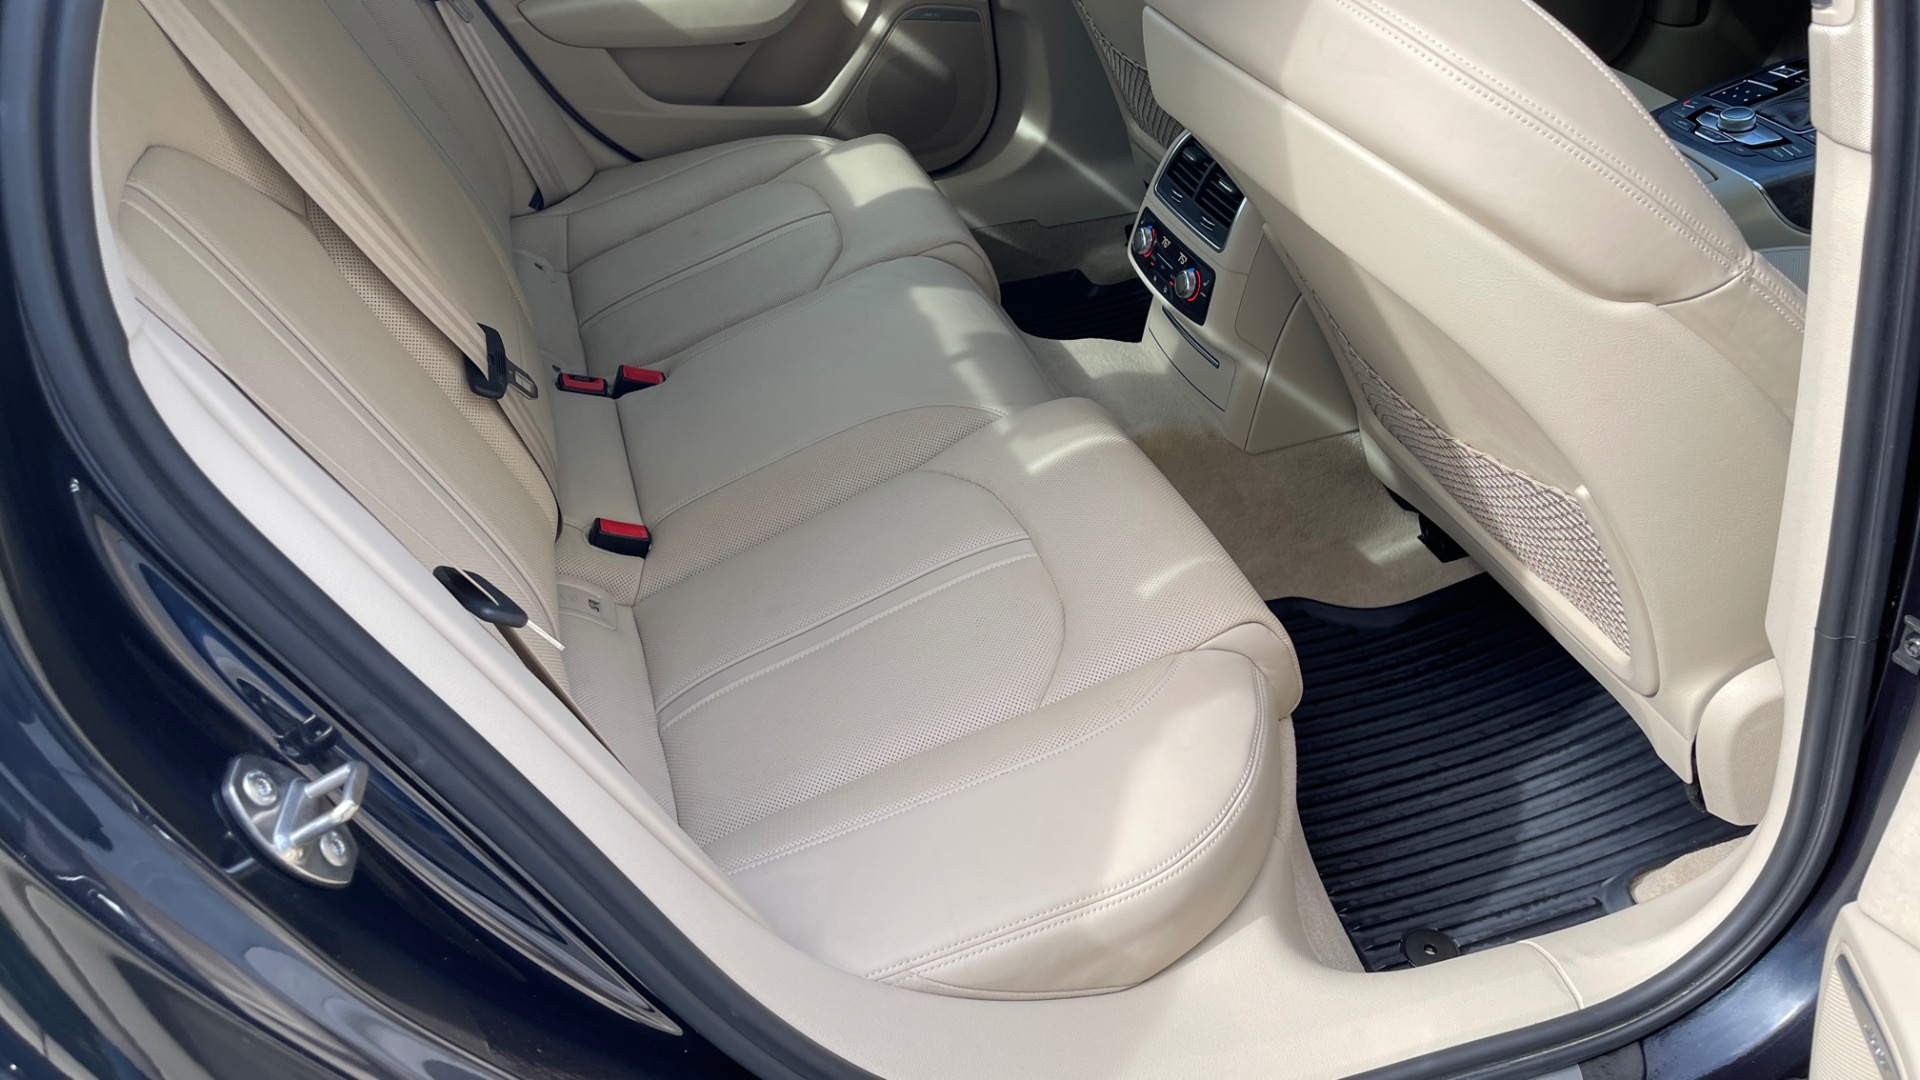 Used 2018 Audi A6 PRESTIGE / CONTOUR FRONT SEATS / MASSAGE / SUNROOF / LEATHER / AWD for sale $38,395 at Formula Imports in Charlotte NC 28227 18